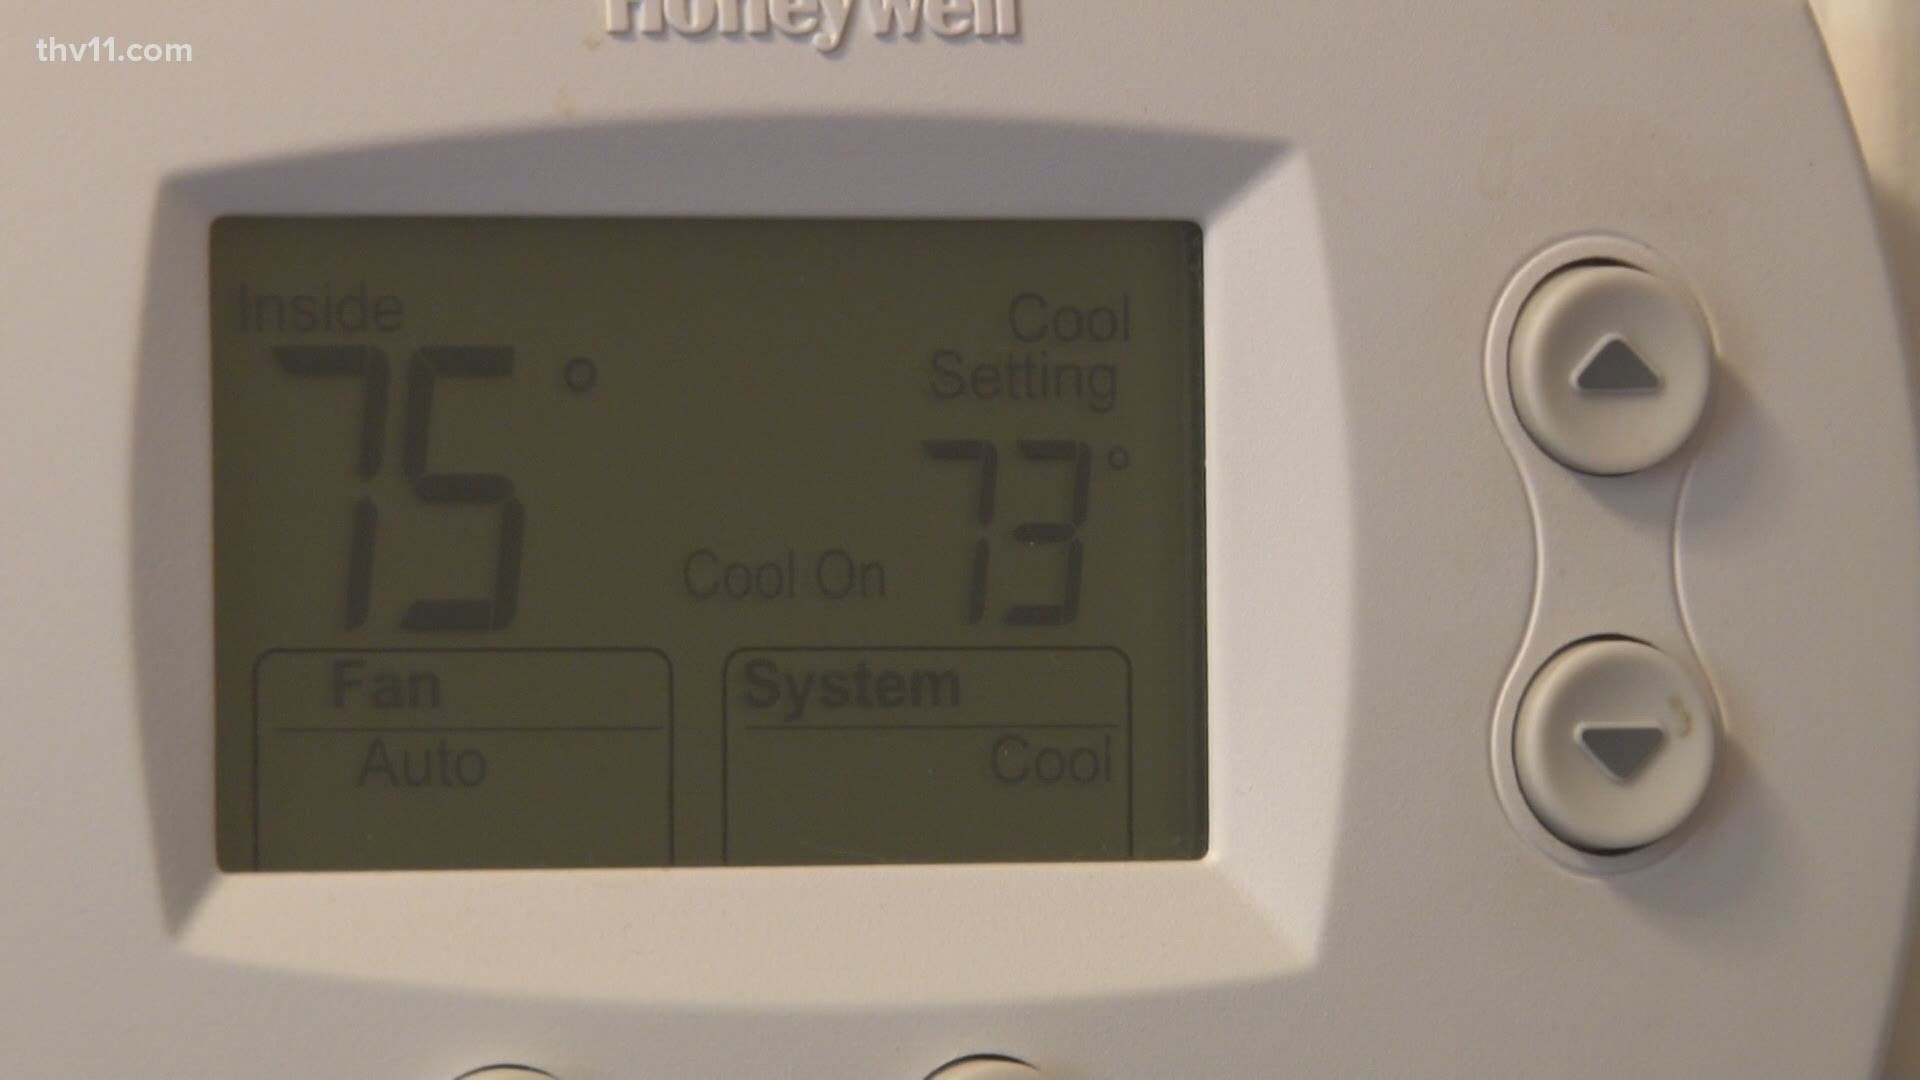 We know its cold outside and that might tempt you to turn up your thermostat. Ross Corson with Centerpoint Energy joins us now to take about conserving energy.